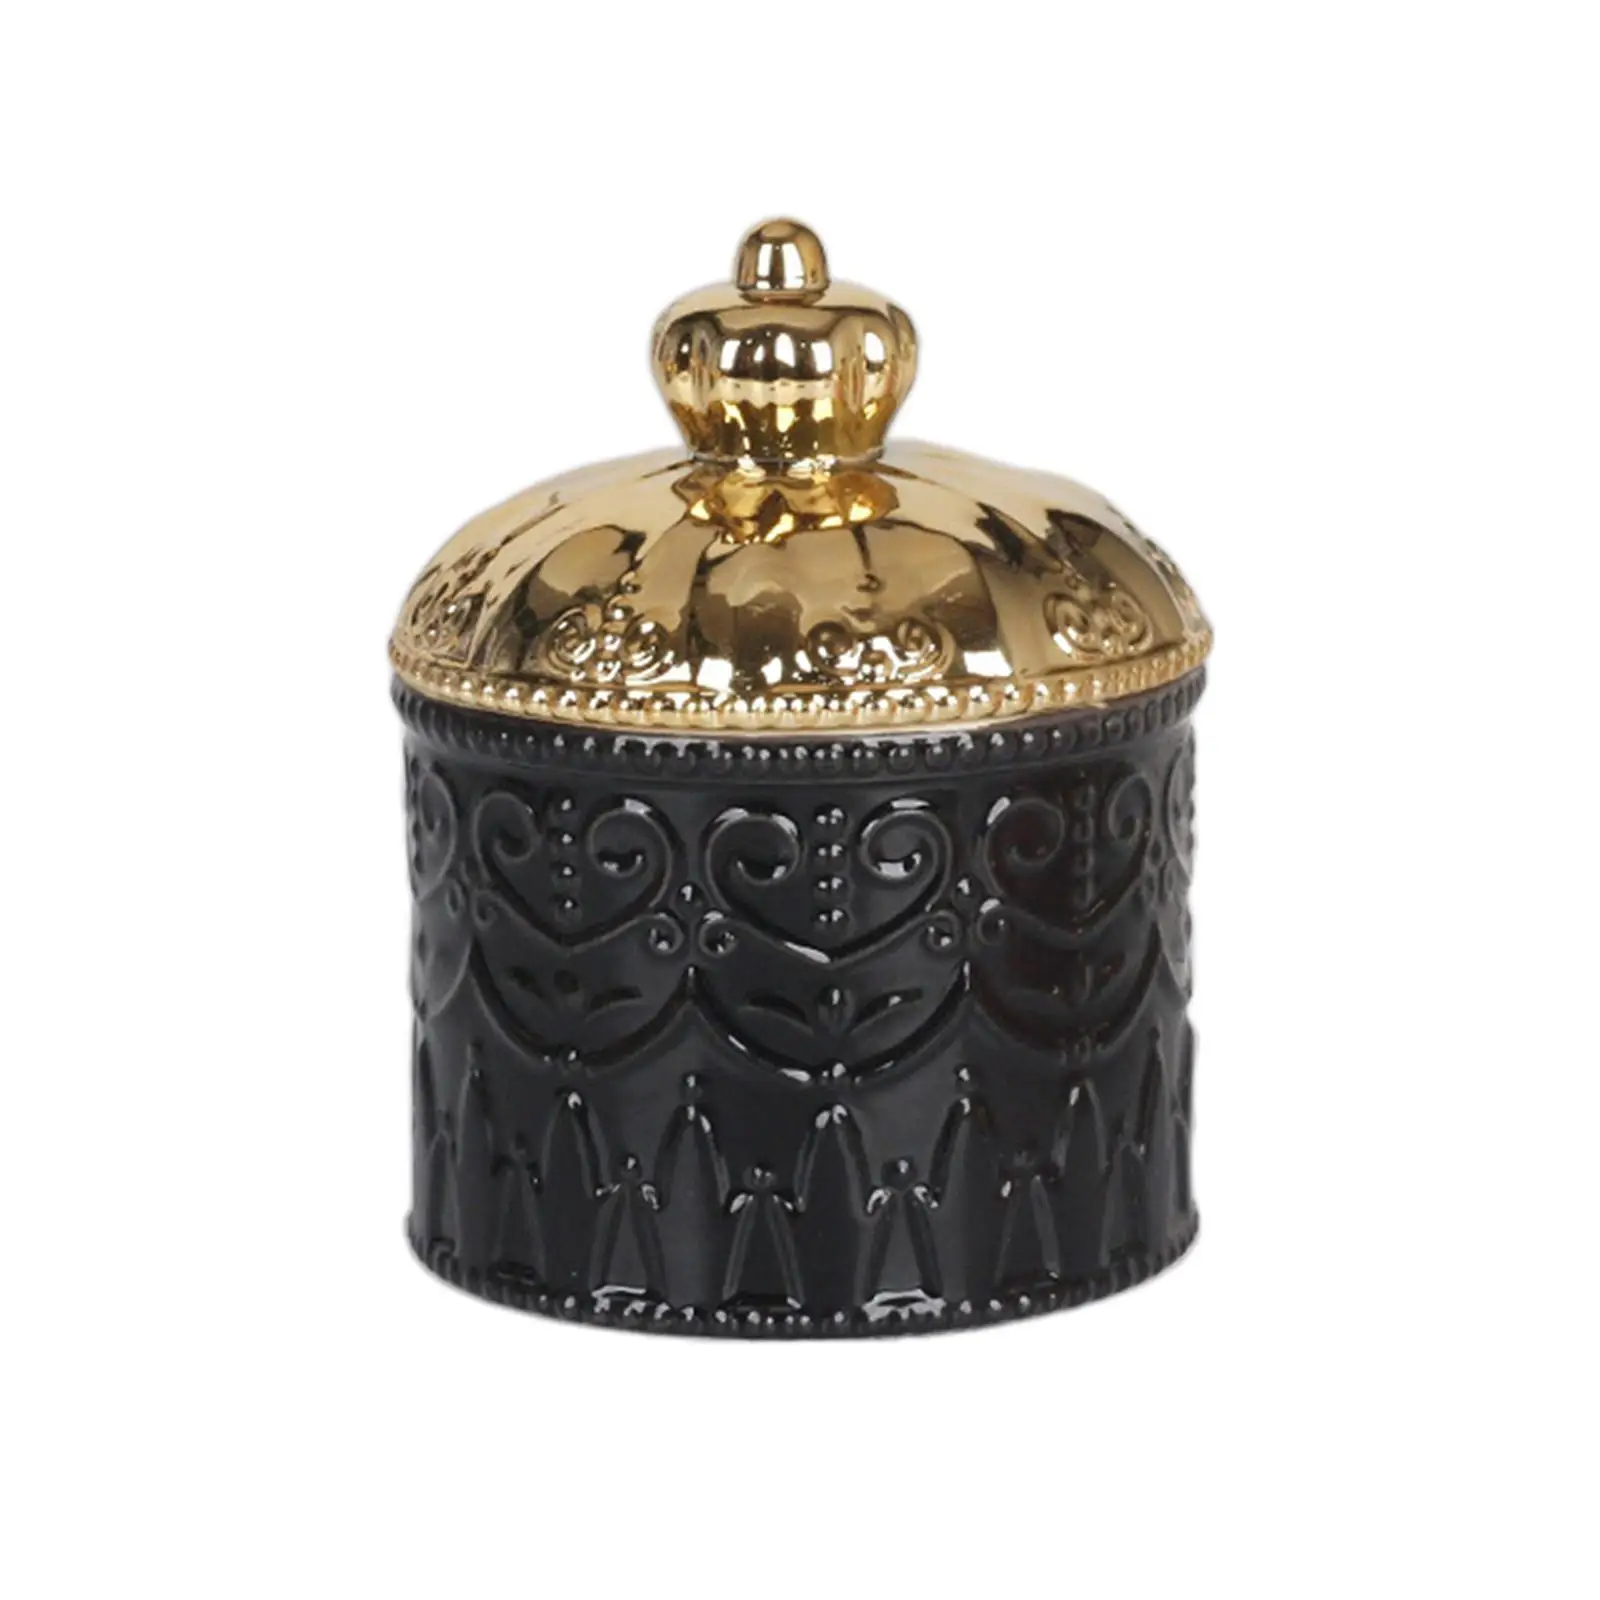 Round Jewelry Box Jewelry Display Holder Canister Trinket Storage Tank for Necklace Earrings Party Decoration Accessories